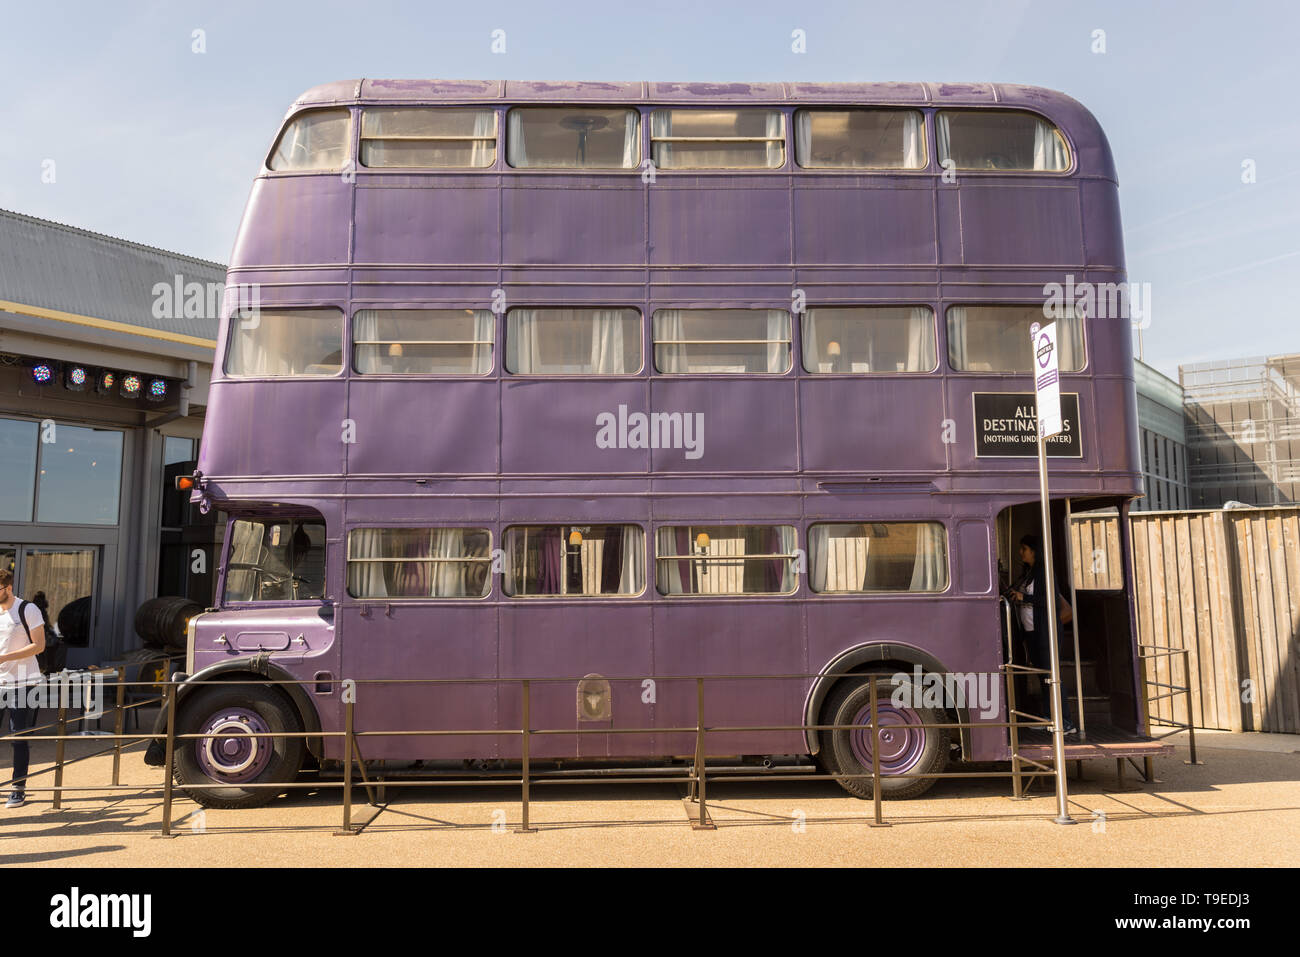 Warner Bros. Studio Tour 'The Making of Harry Potter' The Knight Bus on  display that was used in the production of the films, London, UK May 2019  Stock Photo - Alamy